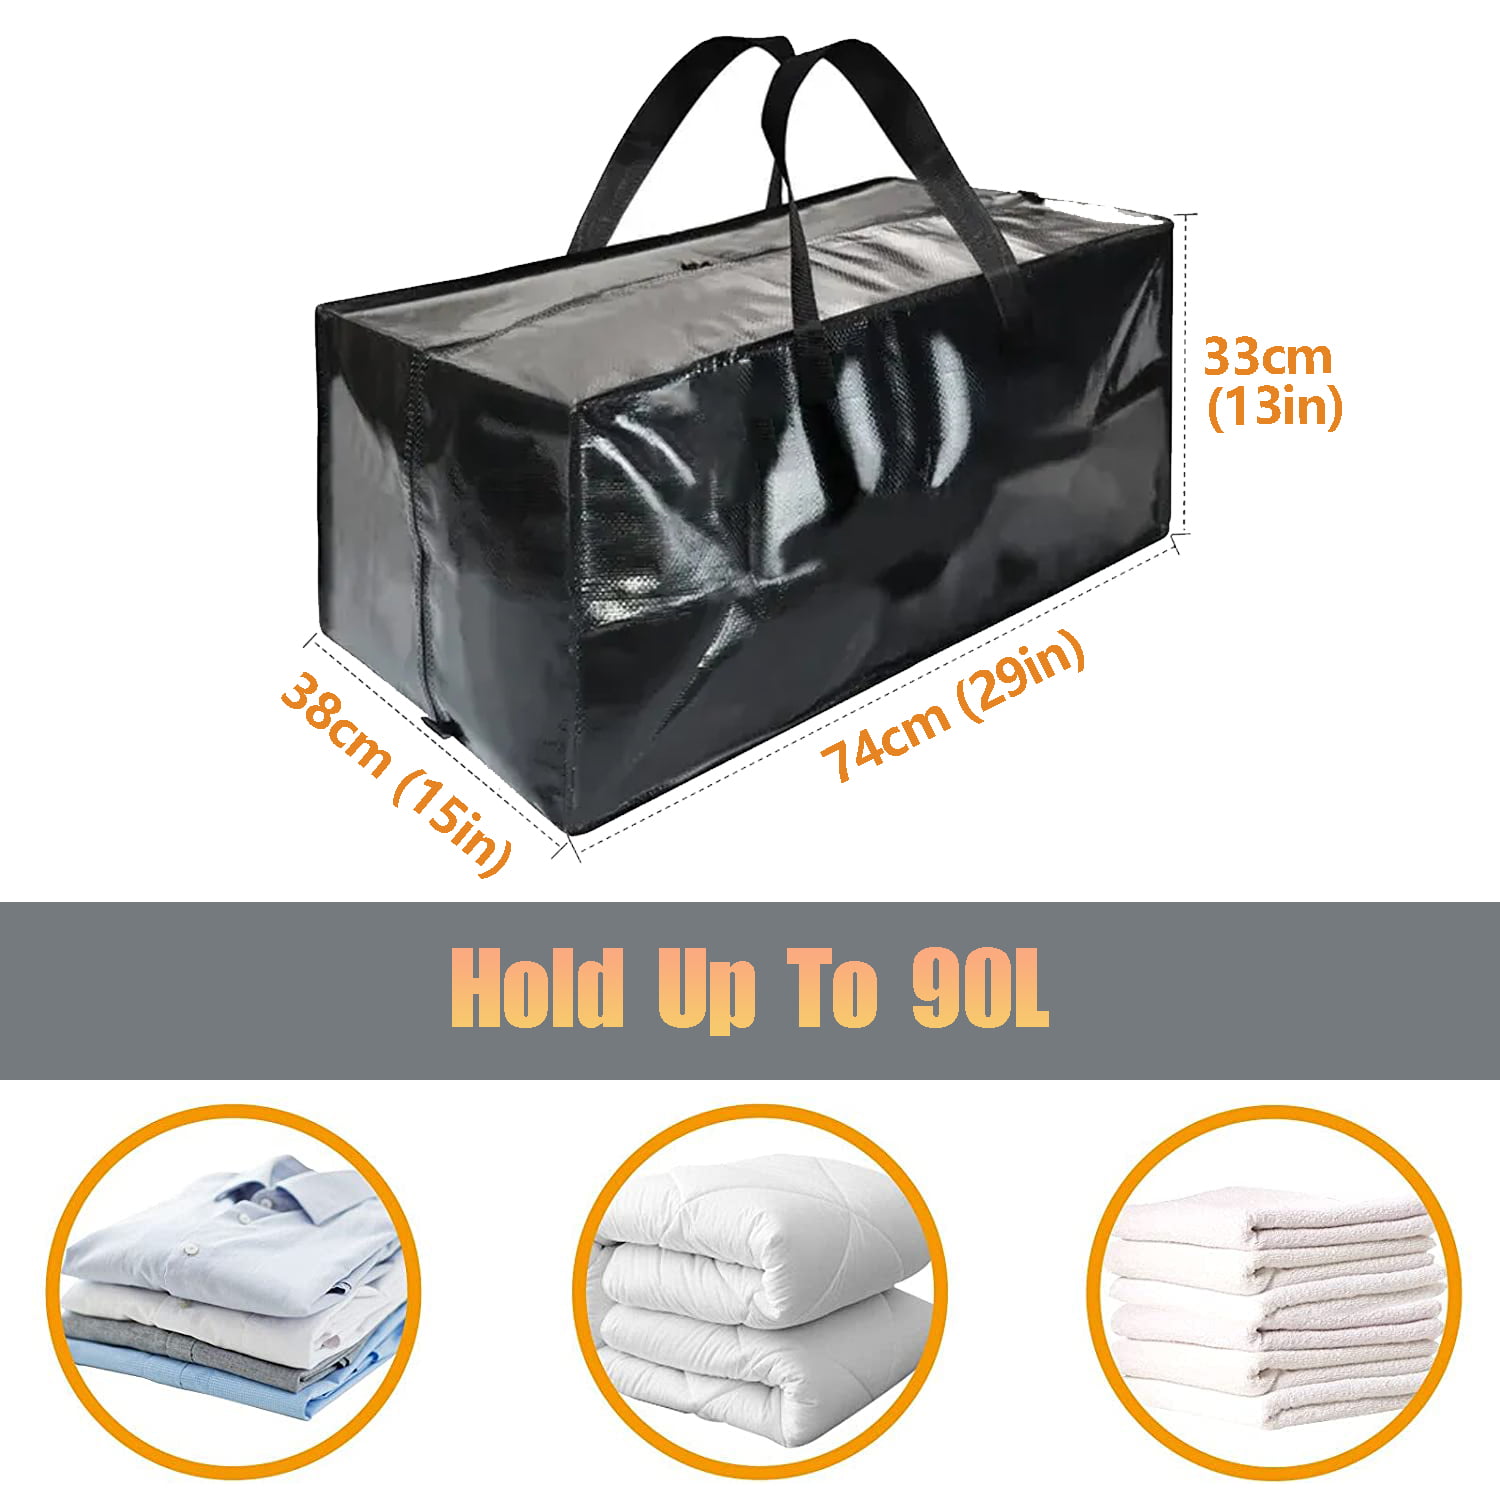 Vioetry extra large moving bags with strong zippers & carrying handles, storage  totes for clothes, supplies, space saving, oversized